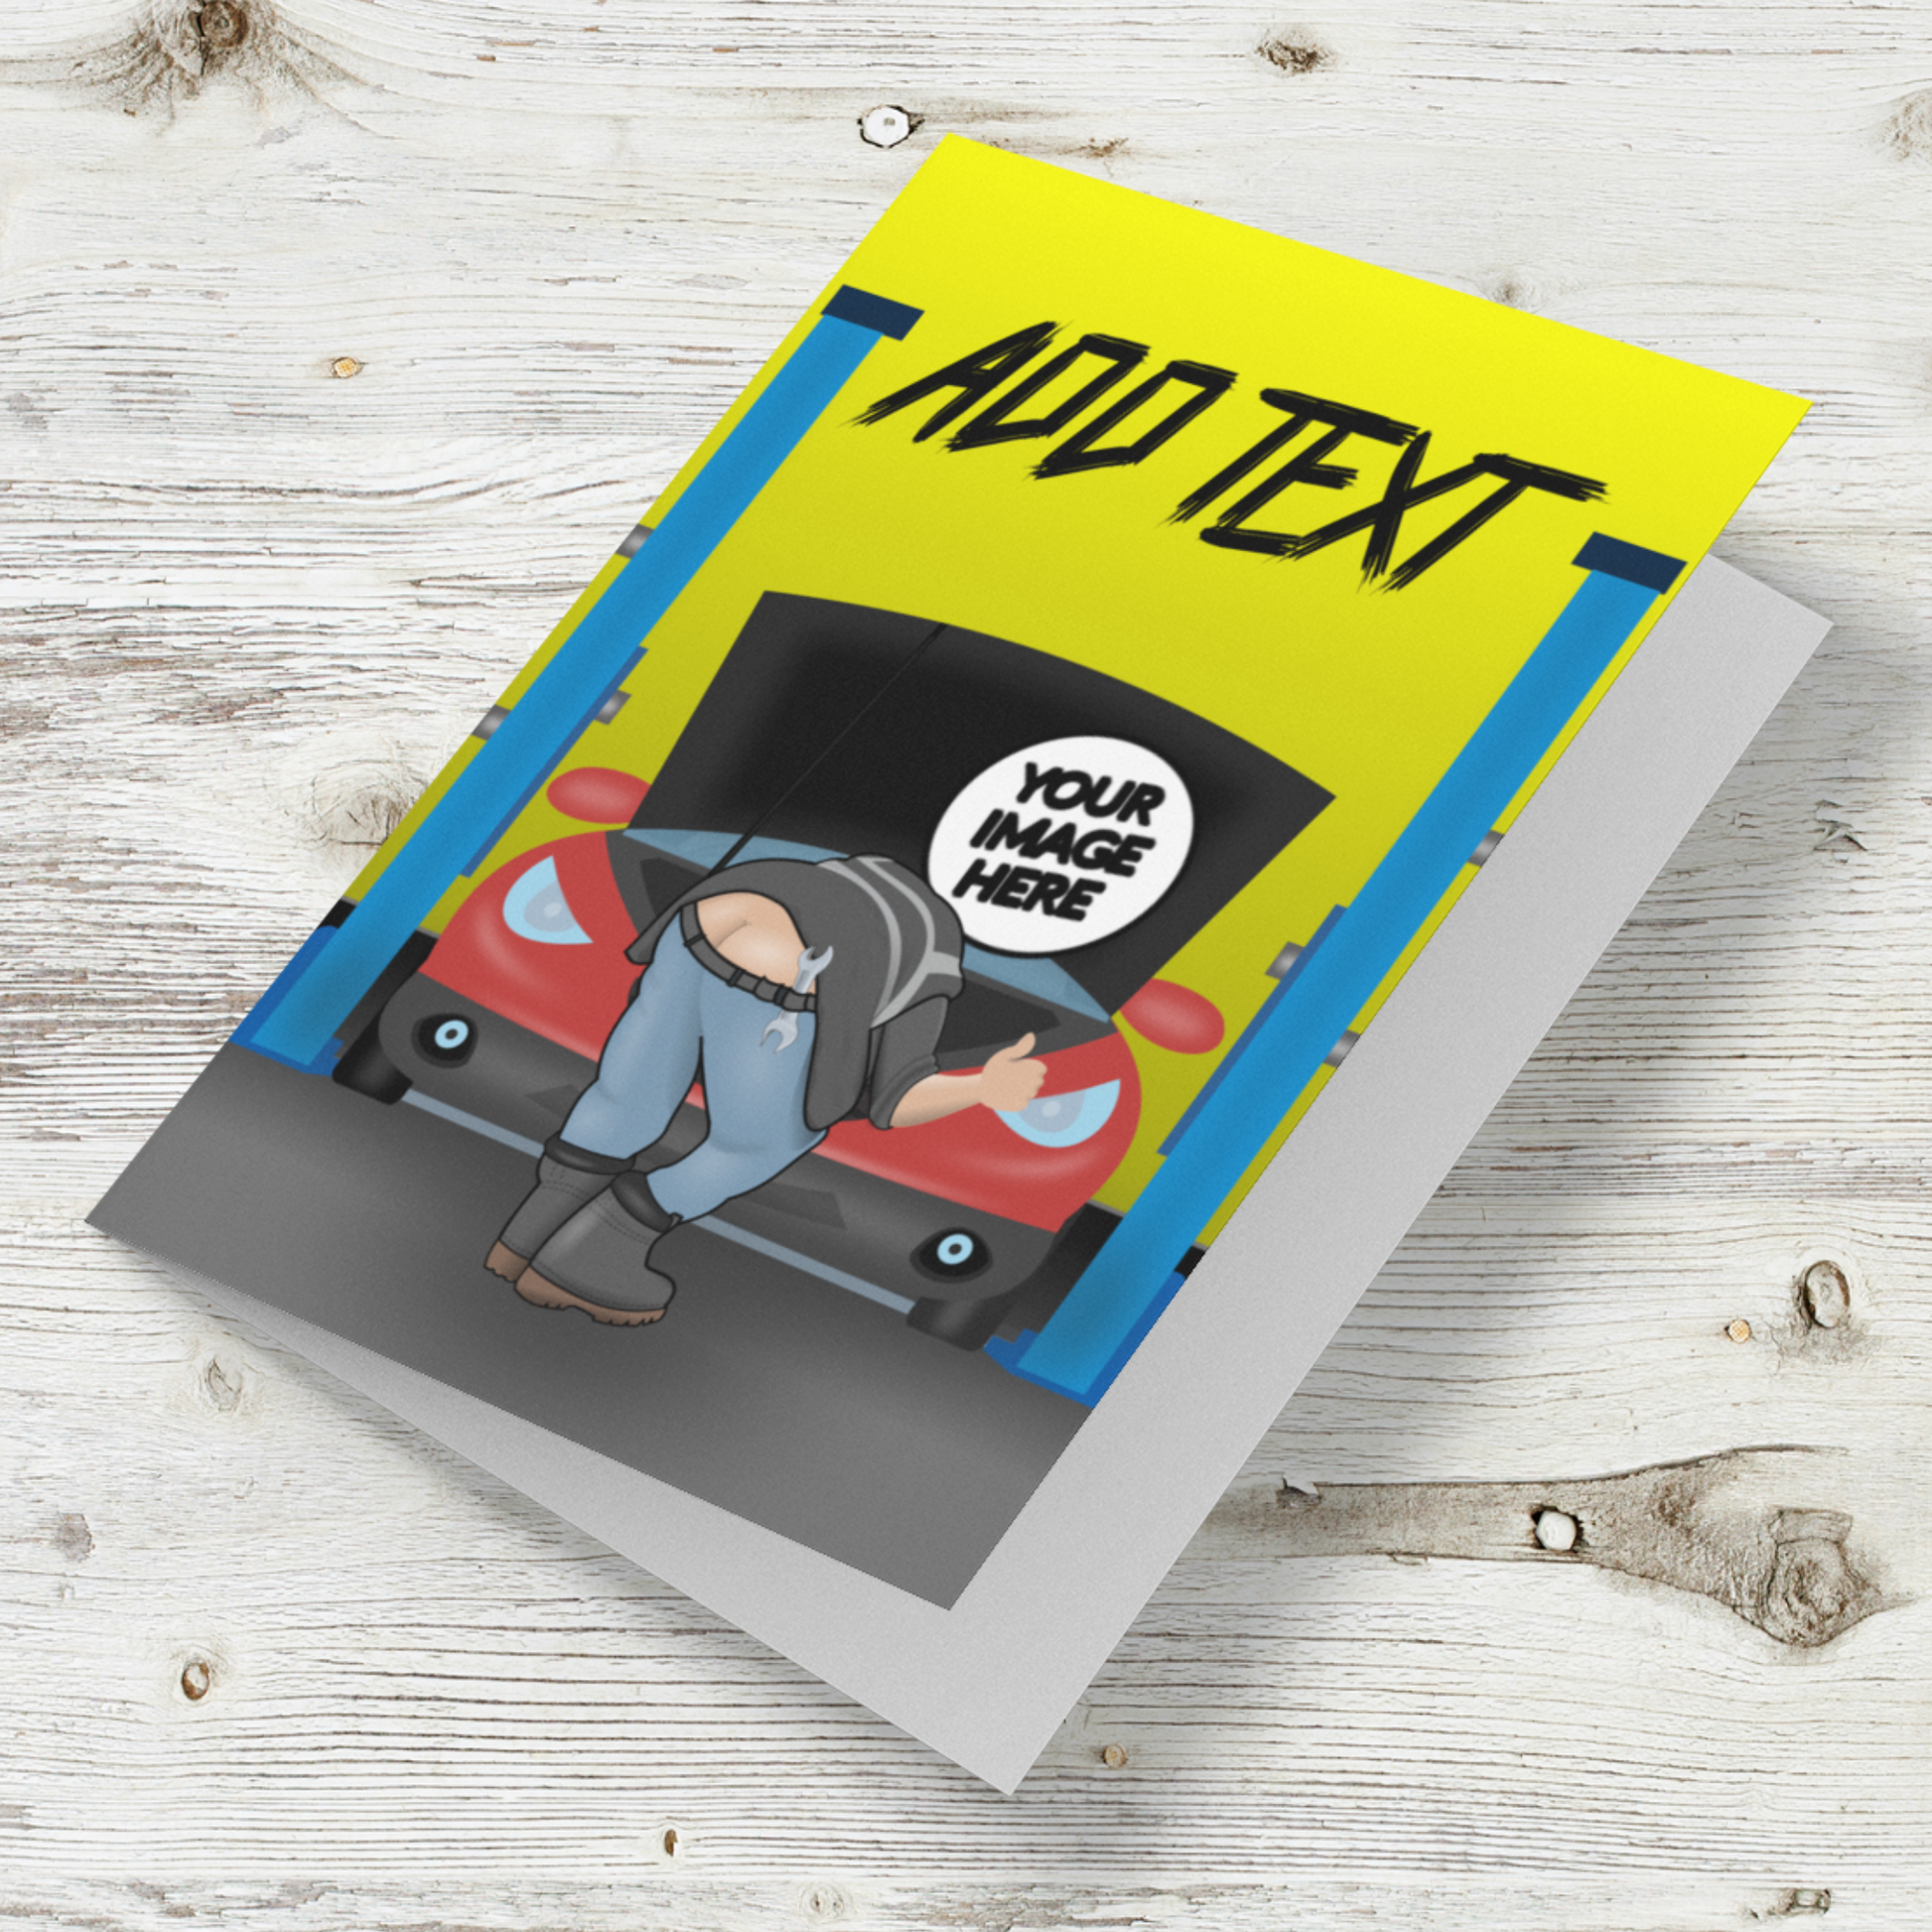 funny personalised photo greeting card of mechanic bending over fixing a car and showing behind builders bum showing "your image here"